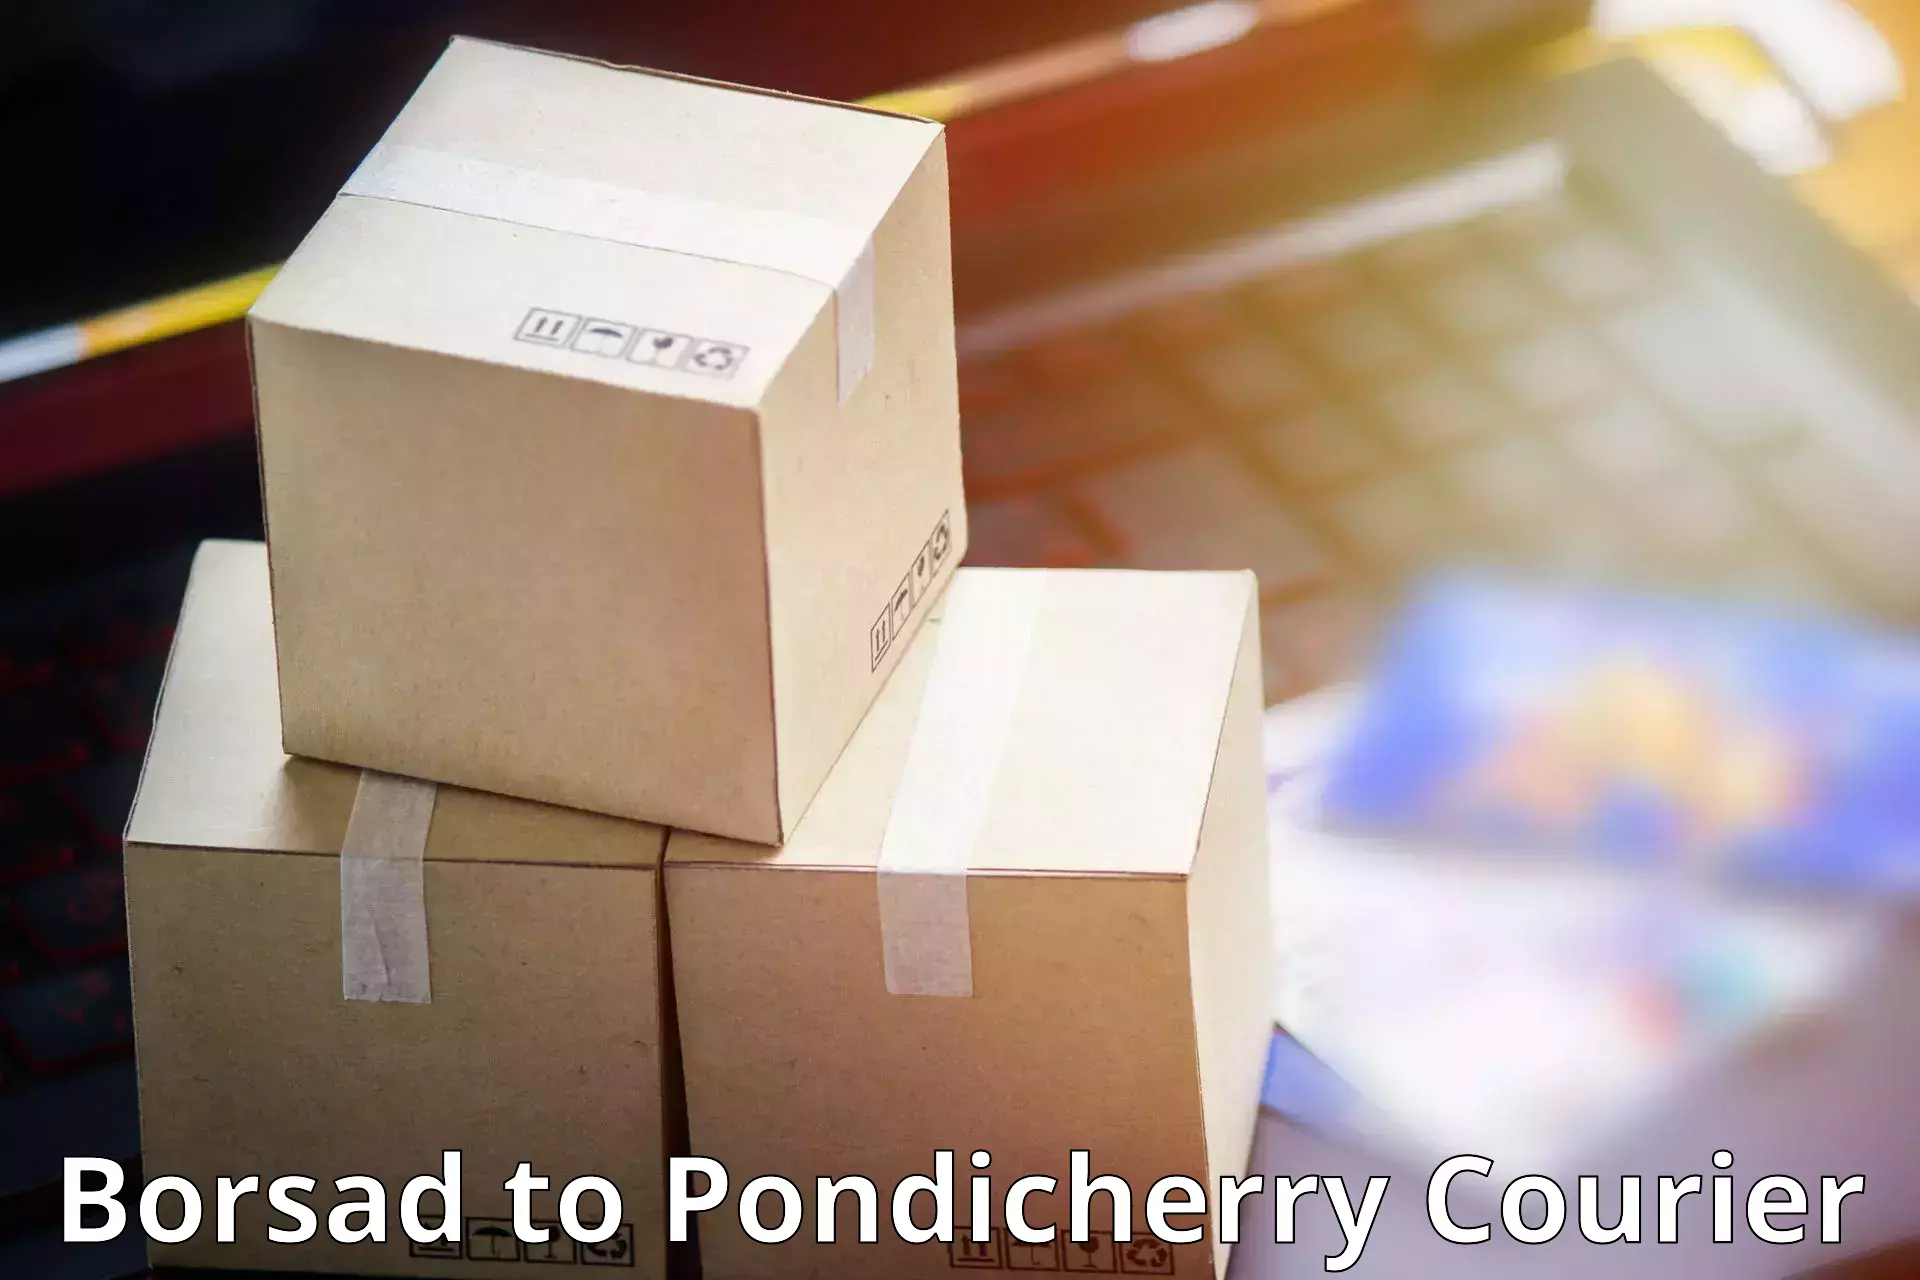 Subscription-based courier Borsad to Pondicherry